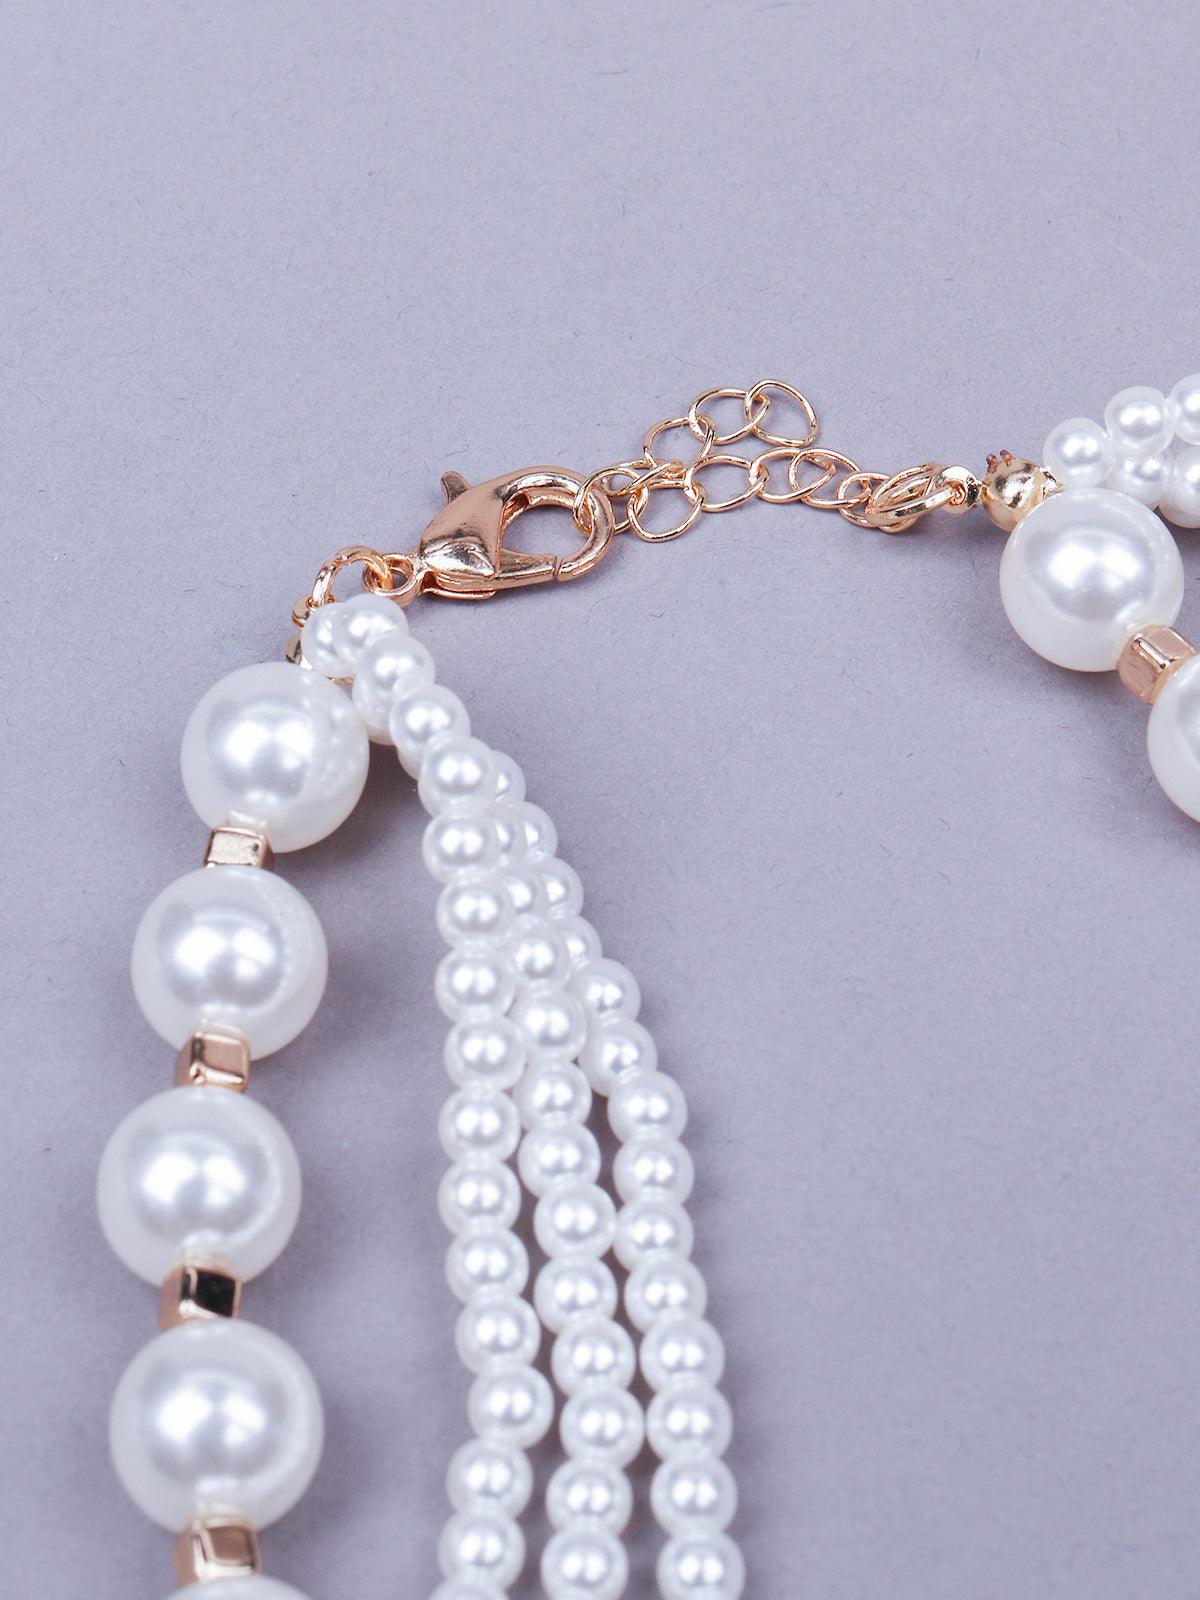 Gorgeous multilayered faux pearl statement necklace - Odette